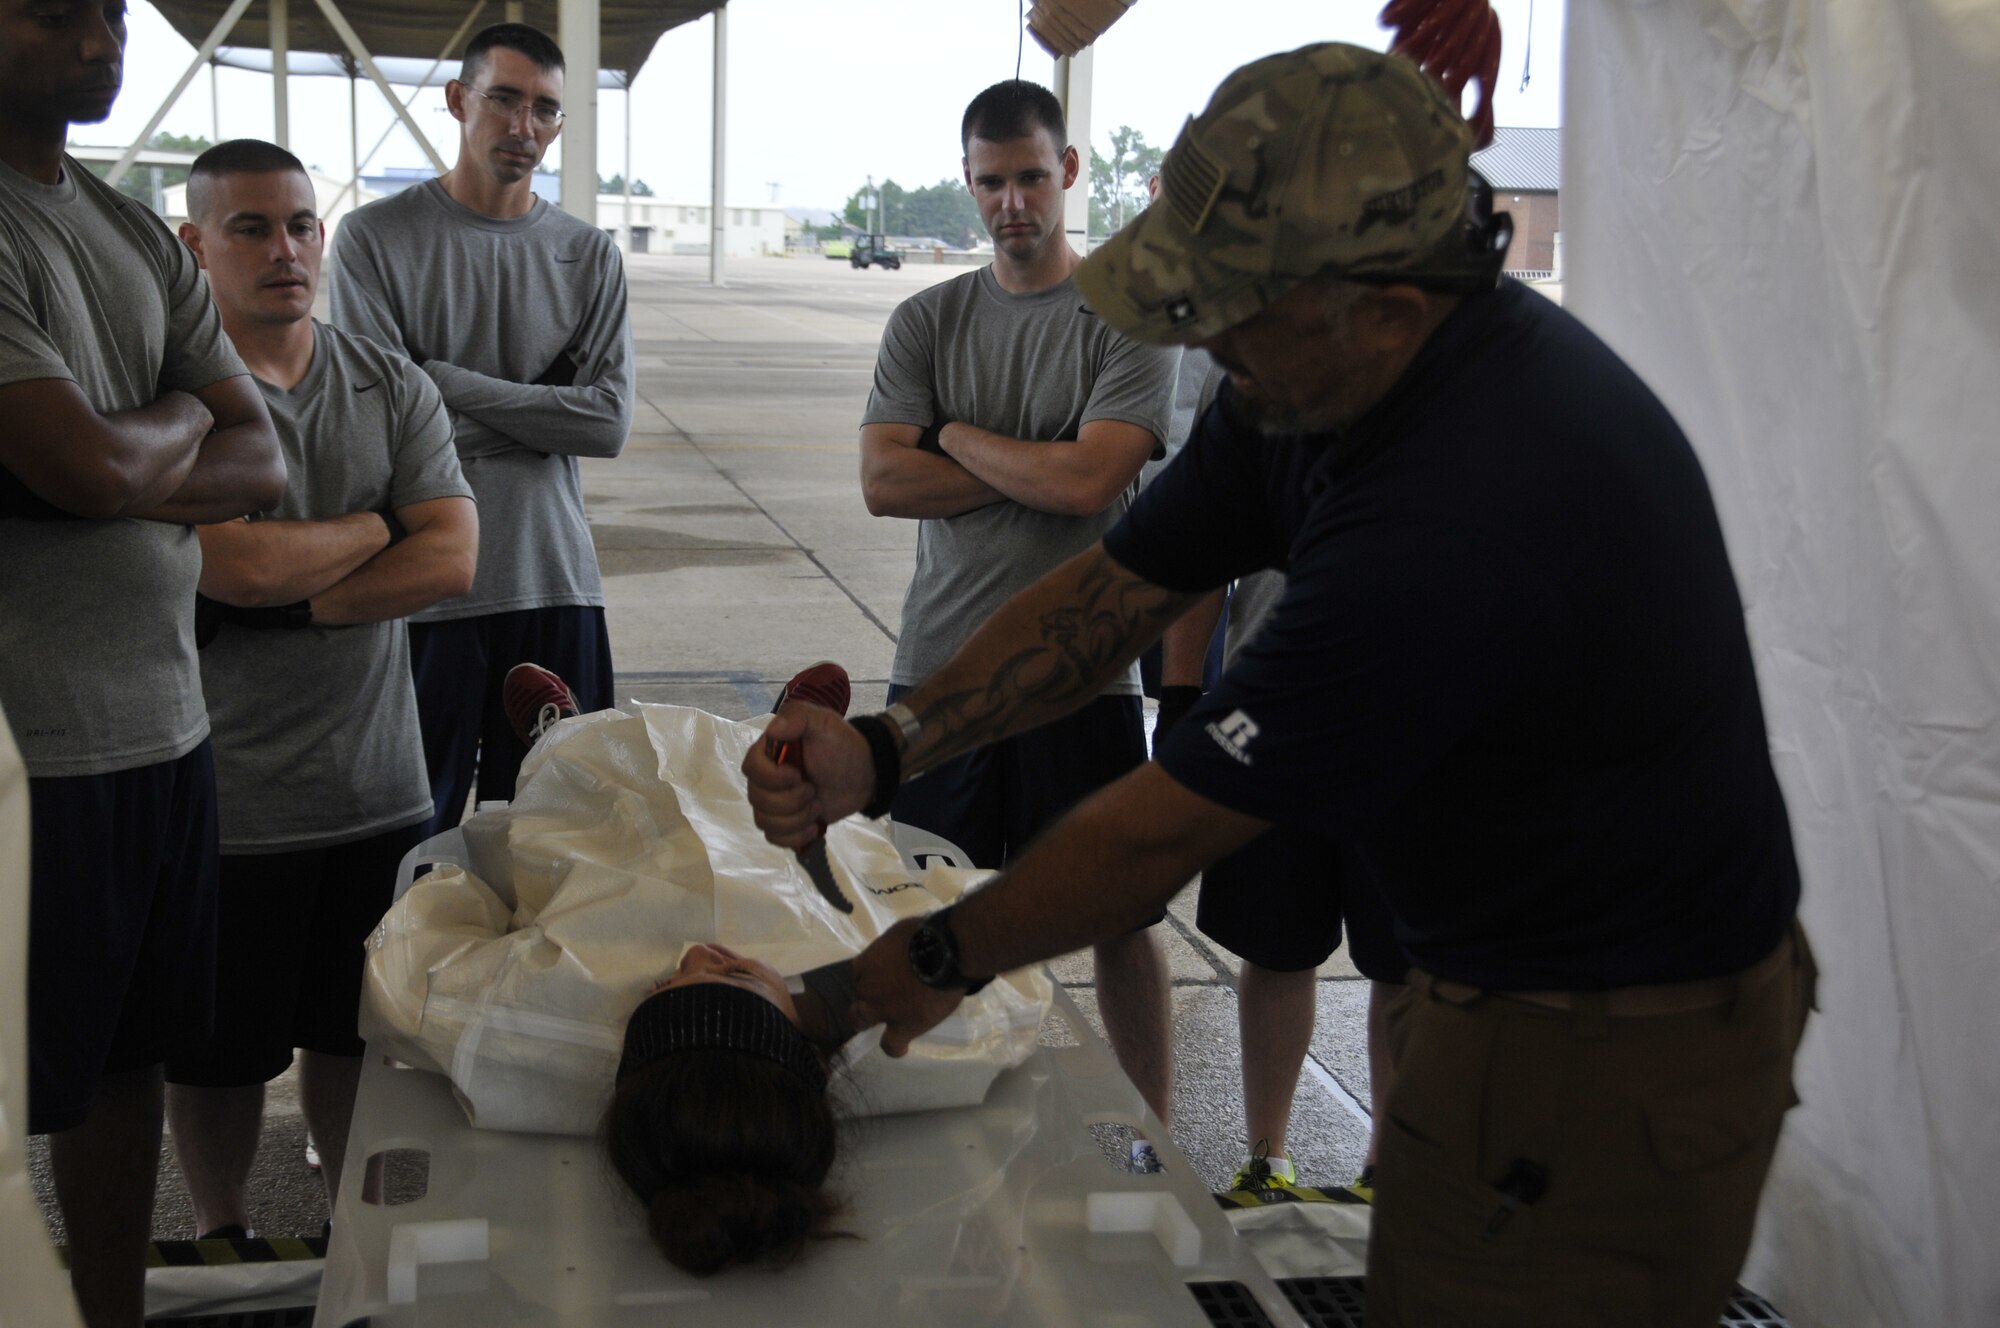 Alex Ibarra, Senior CBRN Training specialist, demonstrates how to cut clothing off contamination victims for Airmen from the 188th Wing during decontamination training at Ebbing Air National Guard Base, Arkansas, July 17. The volunteers, who were from various parts of the wing, learned how to set up a decontamination tent and clean victims of various chemical or nuclear hazards. This training will aid the wing in its mission to support Arkansas citizens in times of disaster. (U.S. Air National Guard photo by Staff Sgt. John Suleski/released)